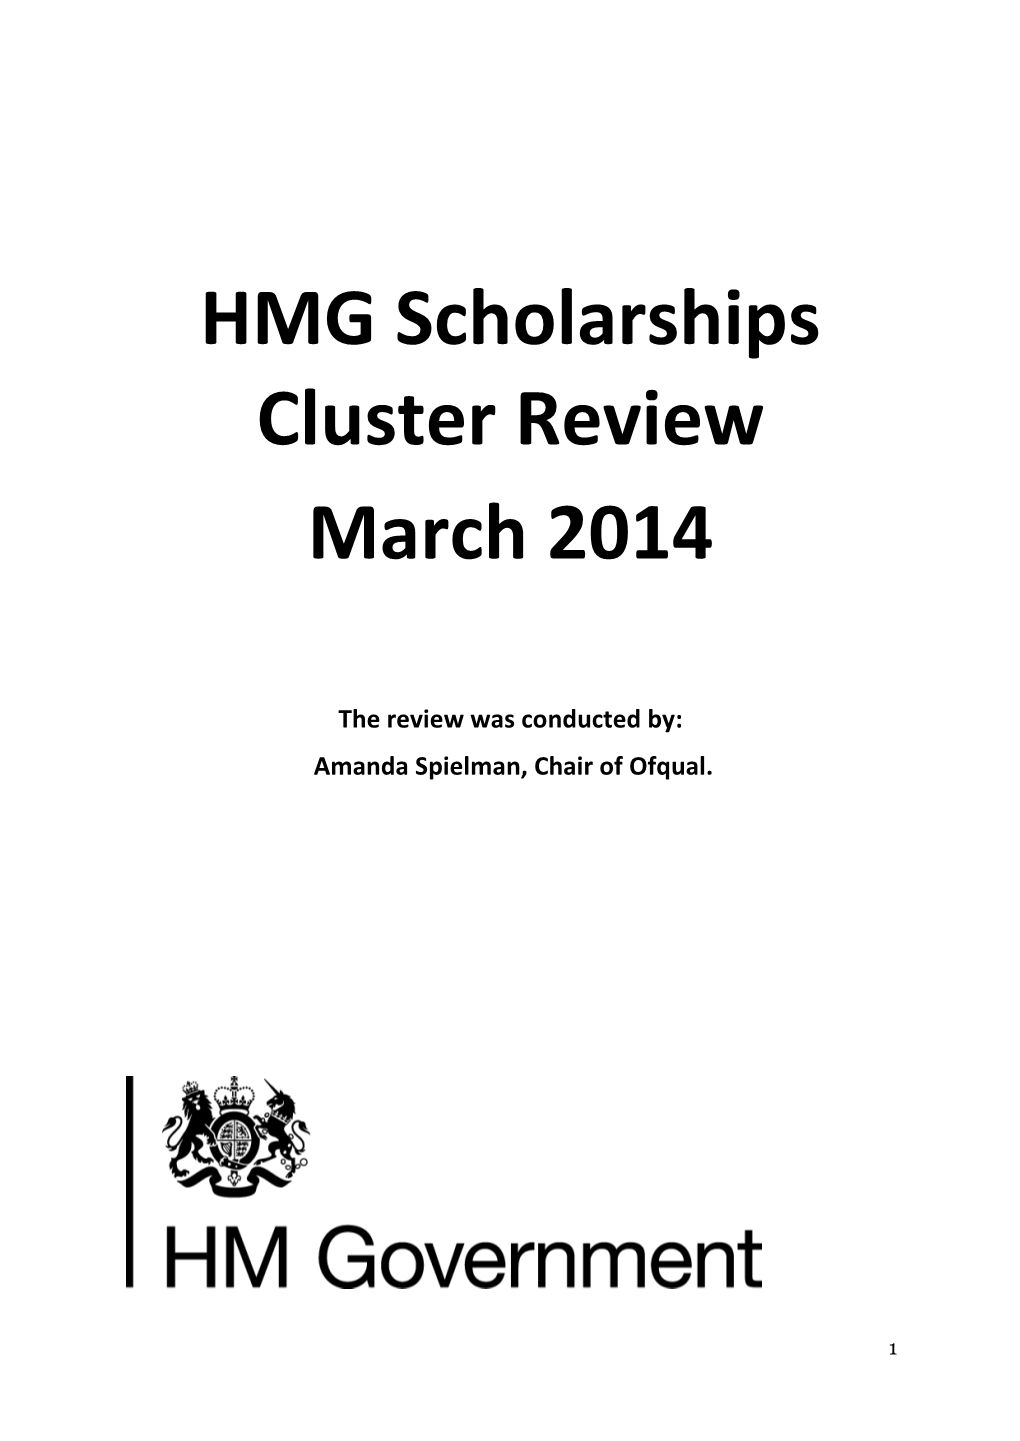 HMG Scholarships Cluster Review March 2014